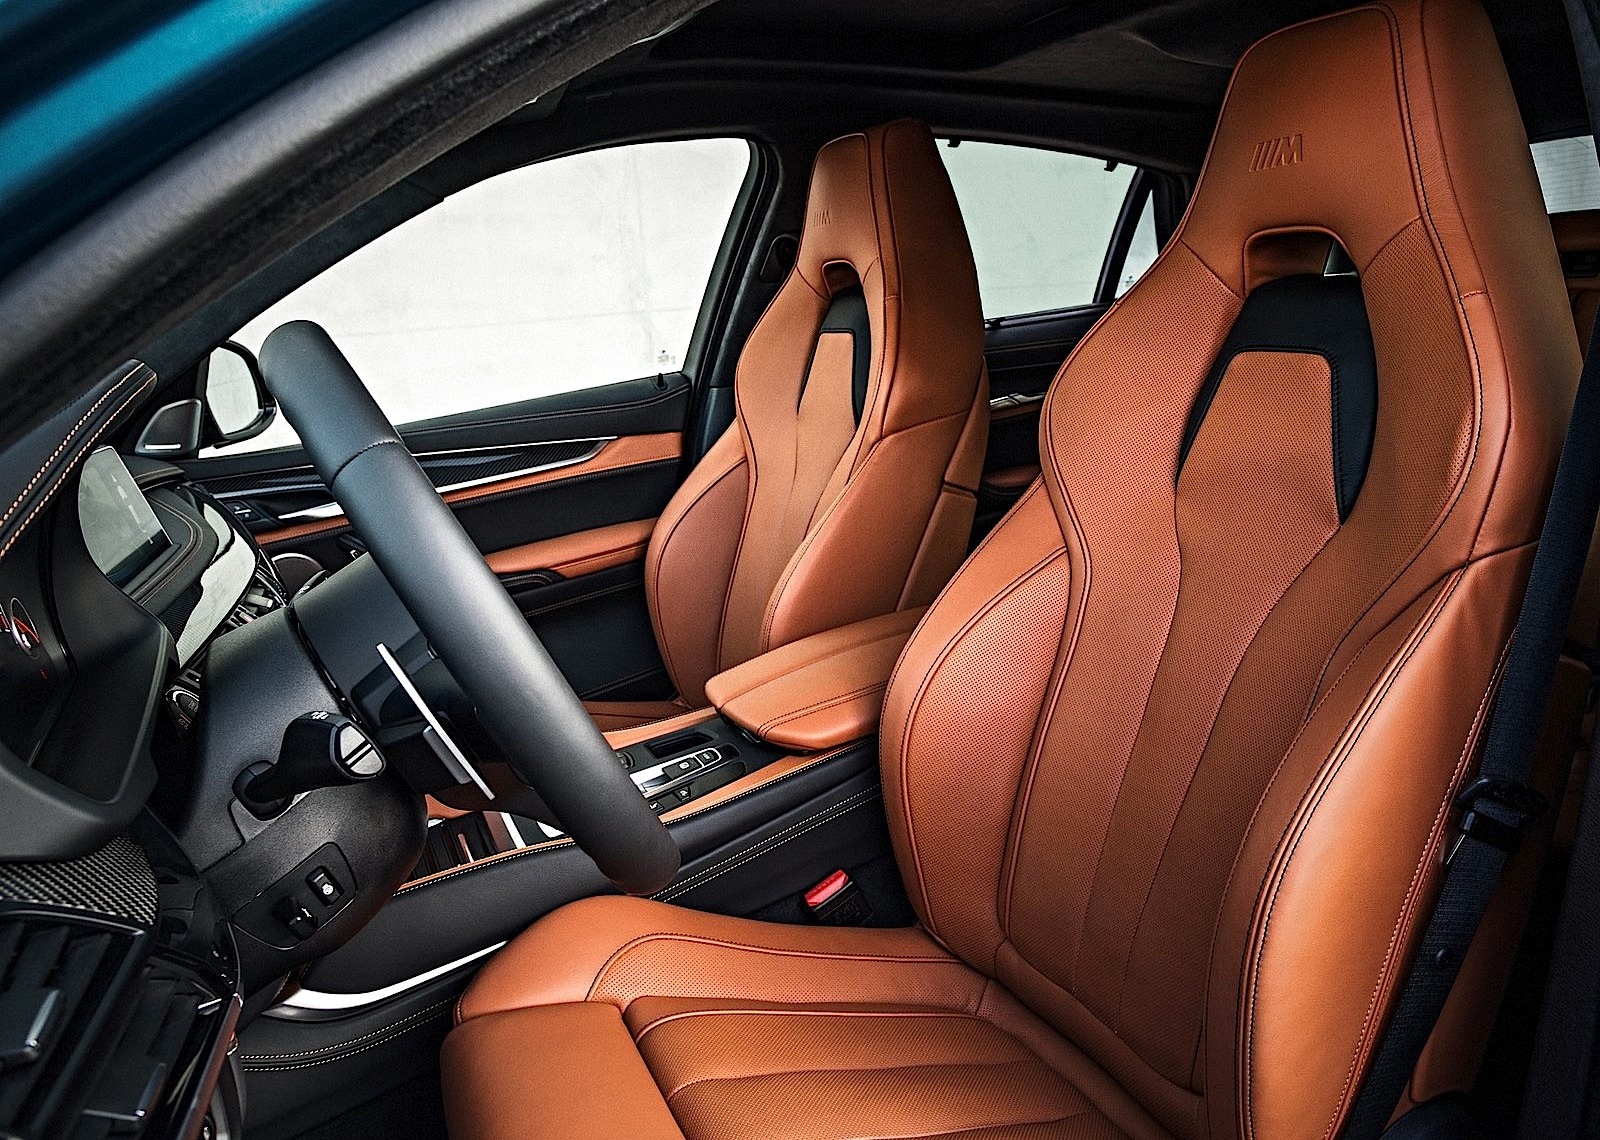 New 2016 Bmw X5 M Review Claims The Seats Are Too Hard